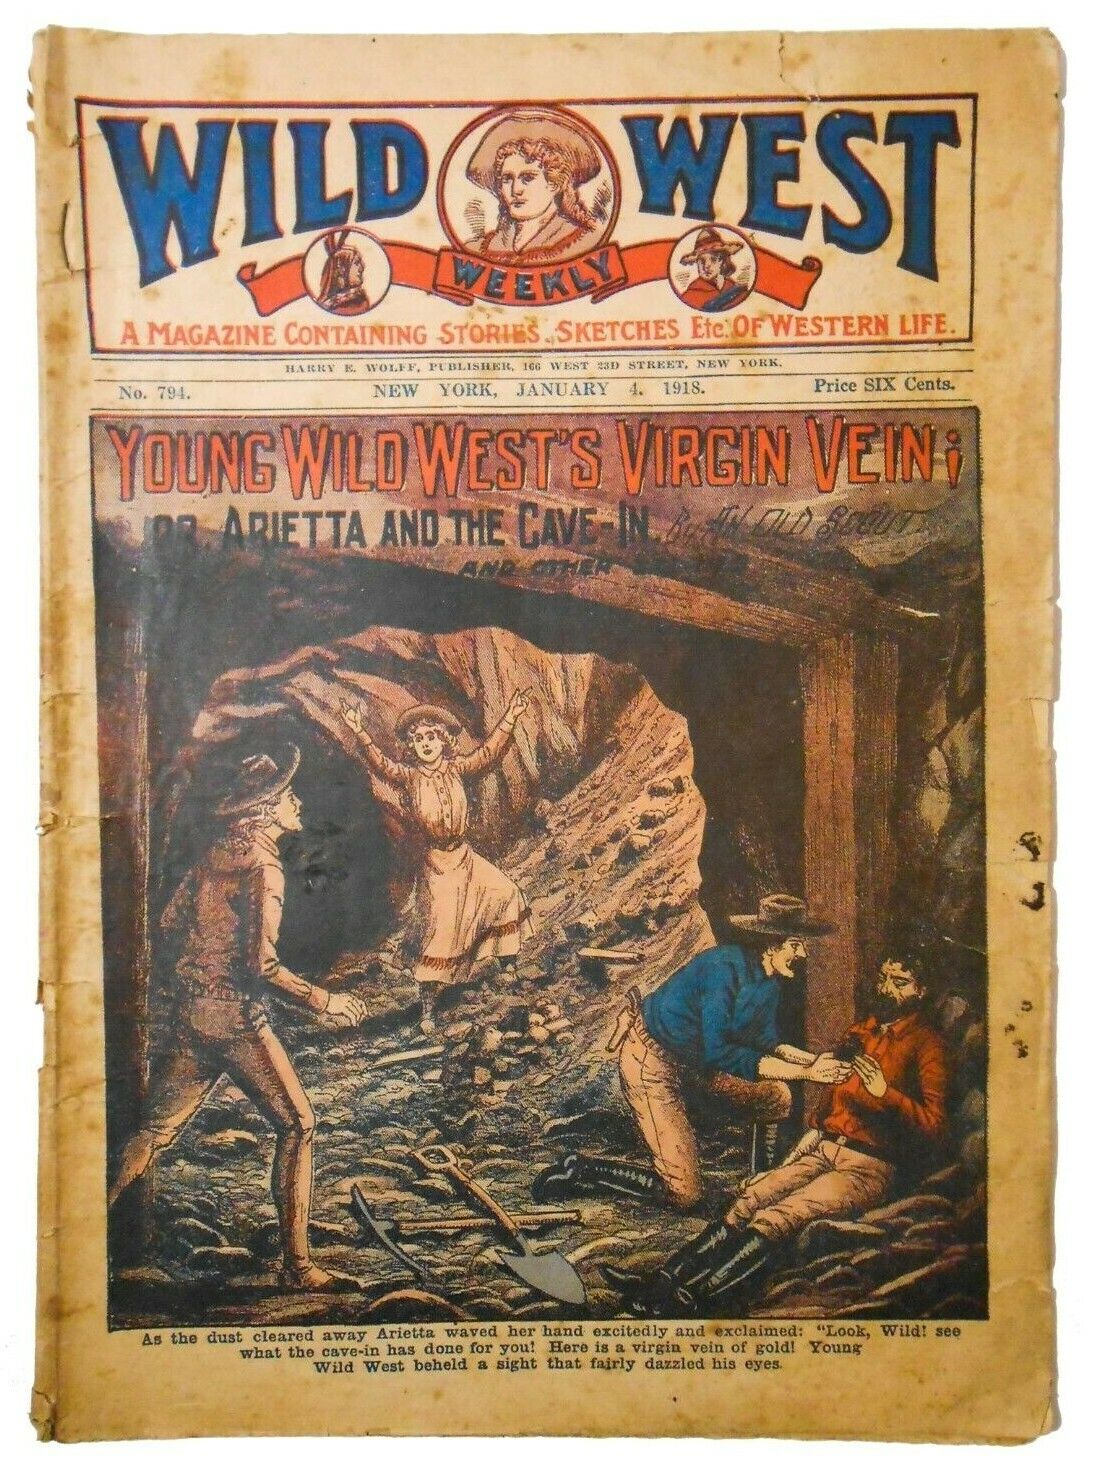 RARE EARLY 20TH C VINT WILD WEST WEEKLY 1918 H E WOLFF WESTERN THEMED PERIODICAL